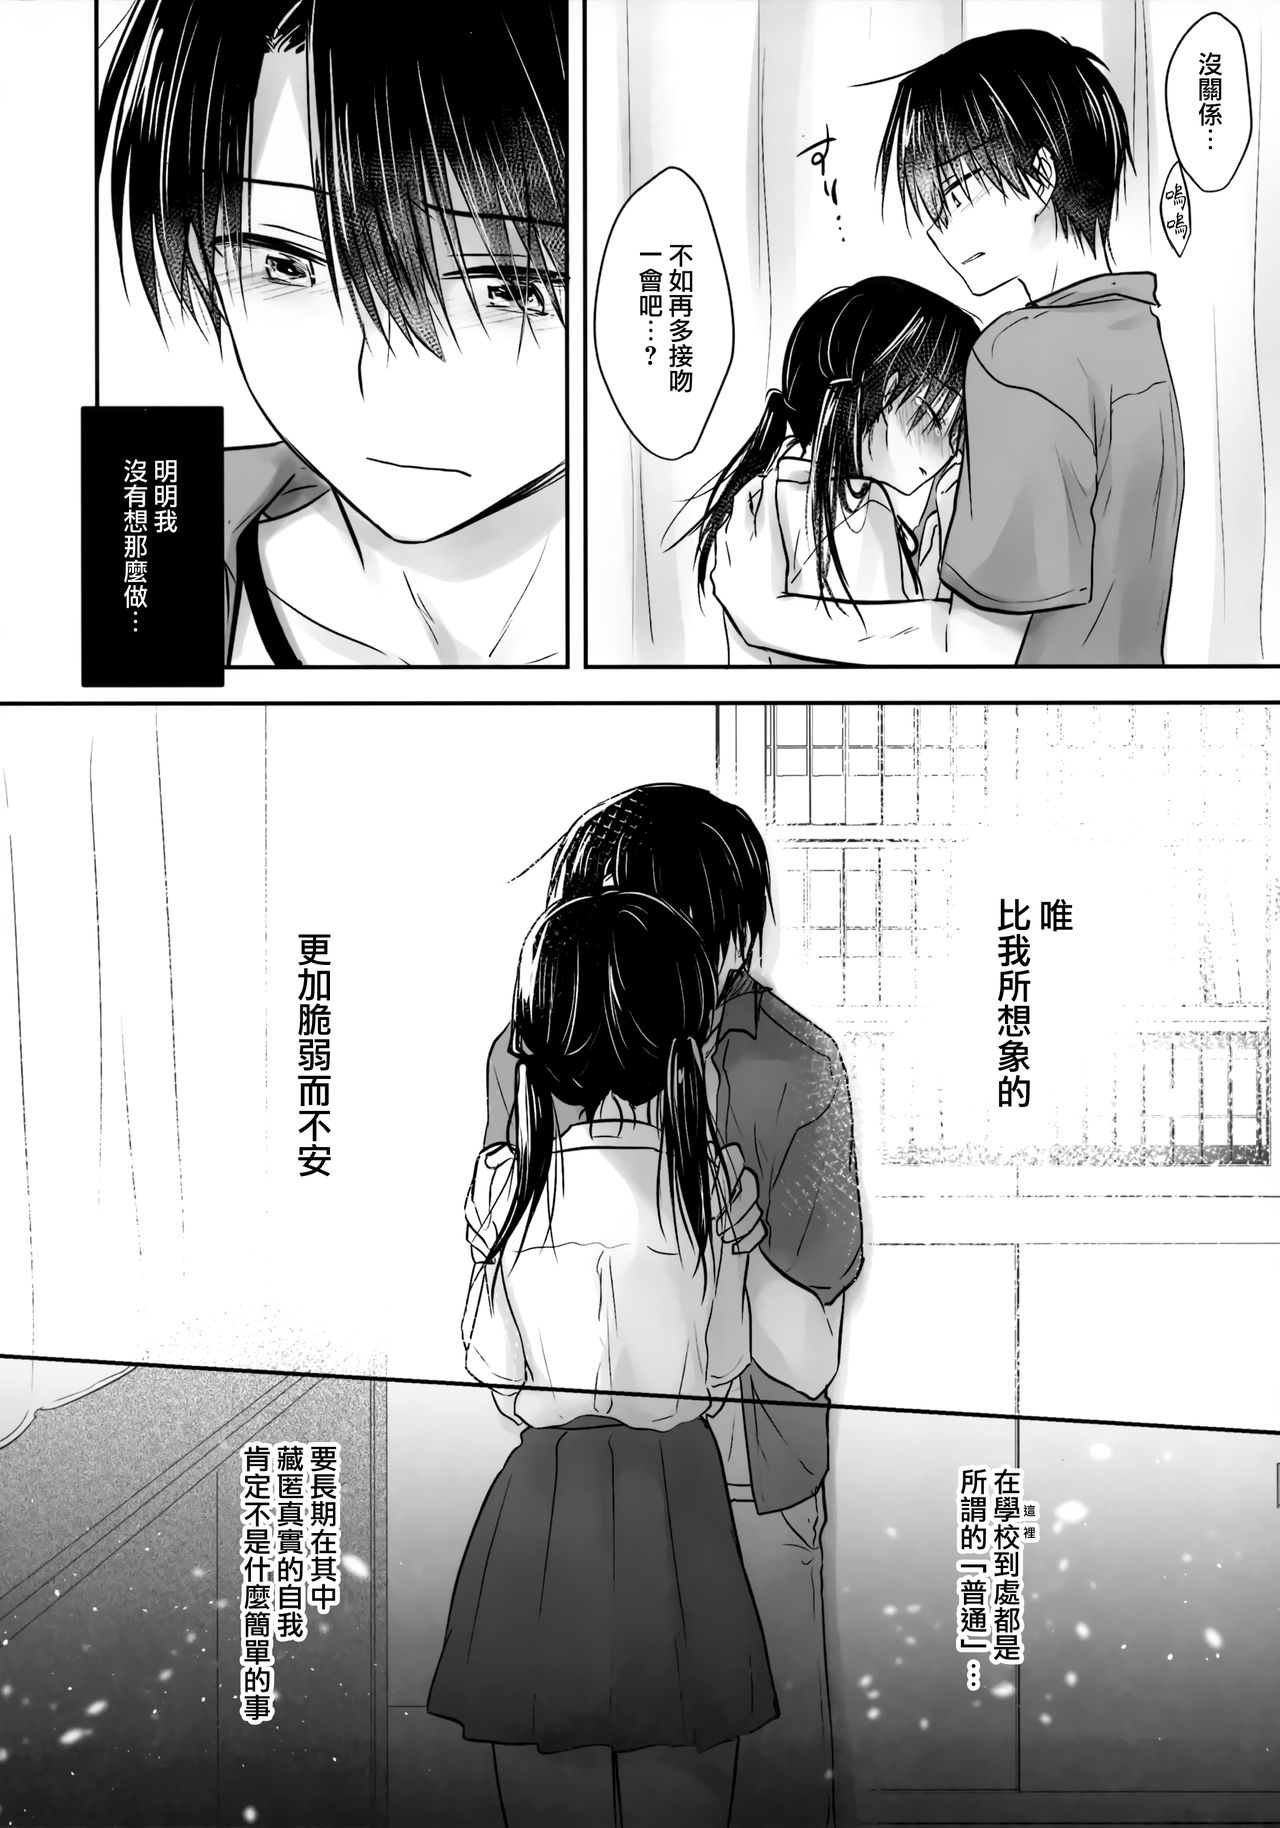 (C96) [Aquadrop (Mikami Mika)] Omoide Sex [Chinese] [山樱汉化] page 25 full